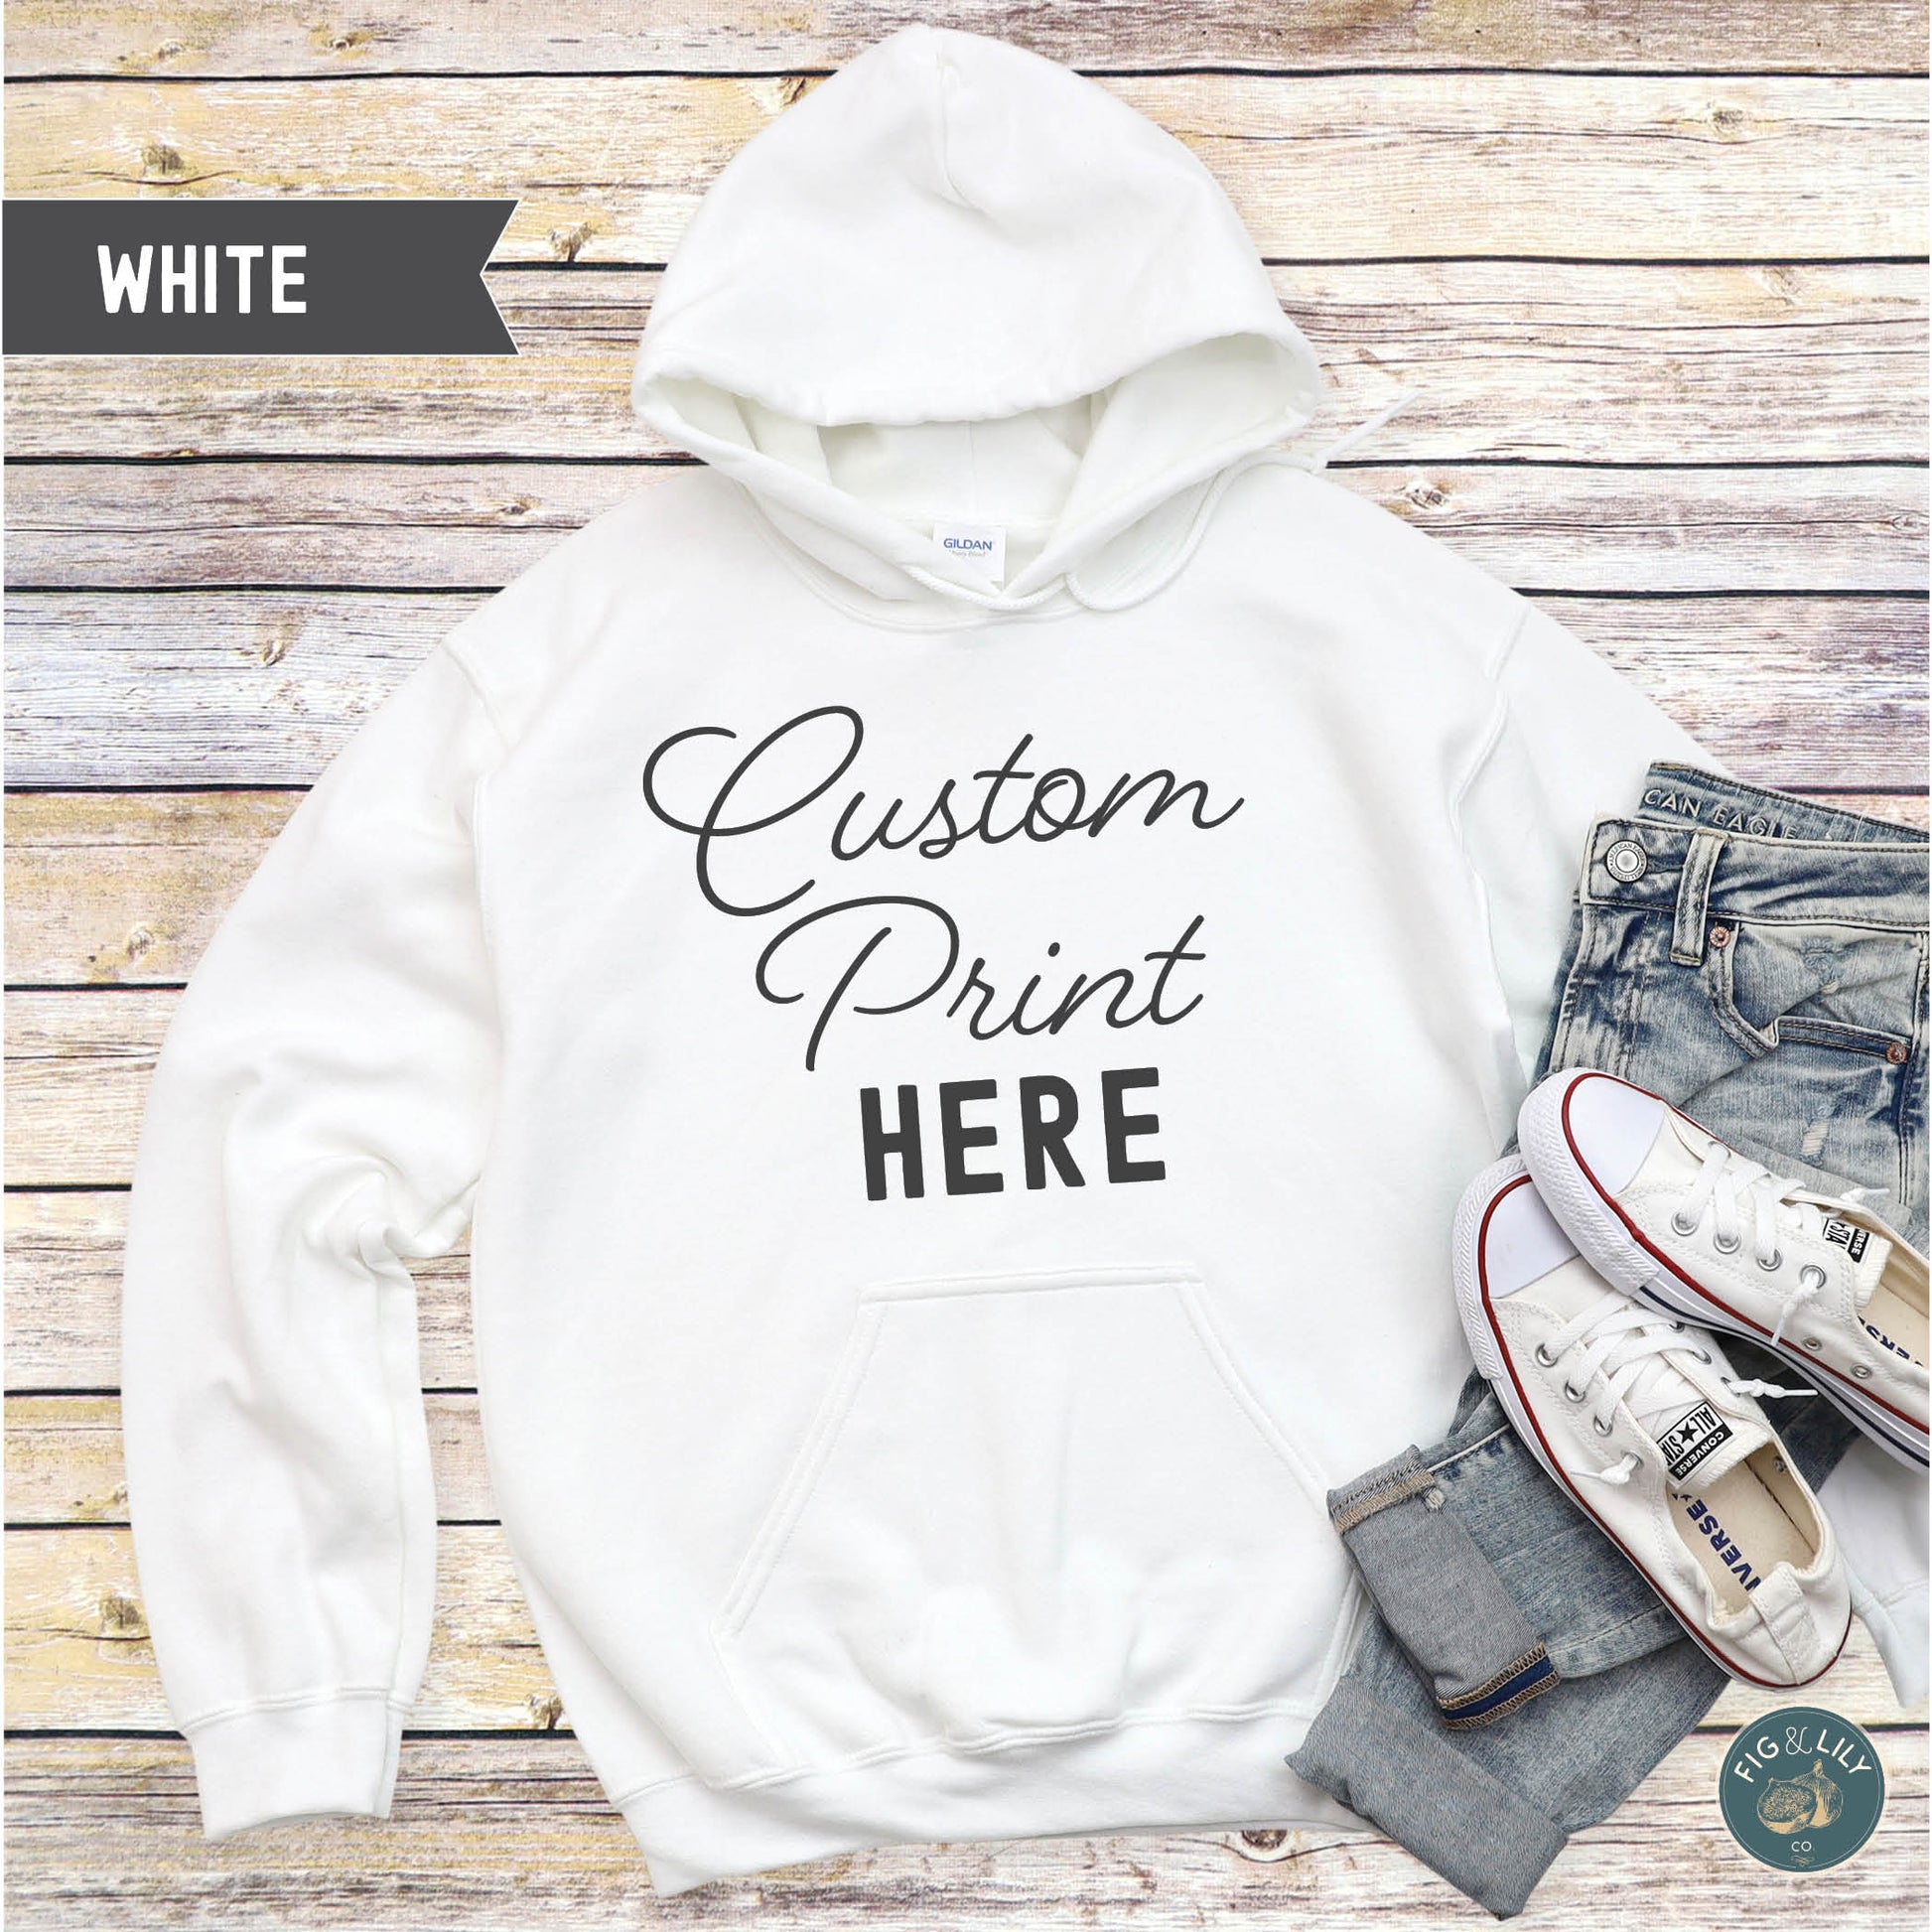 White Unisex Hoodie, Custom Printed sweatshirt Design, Your Design Here, Personalized Design created just for you, digital proof approval included